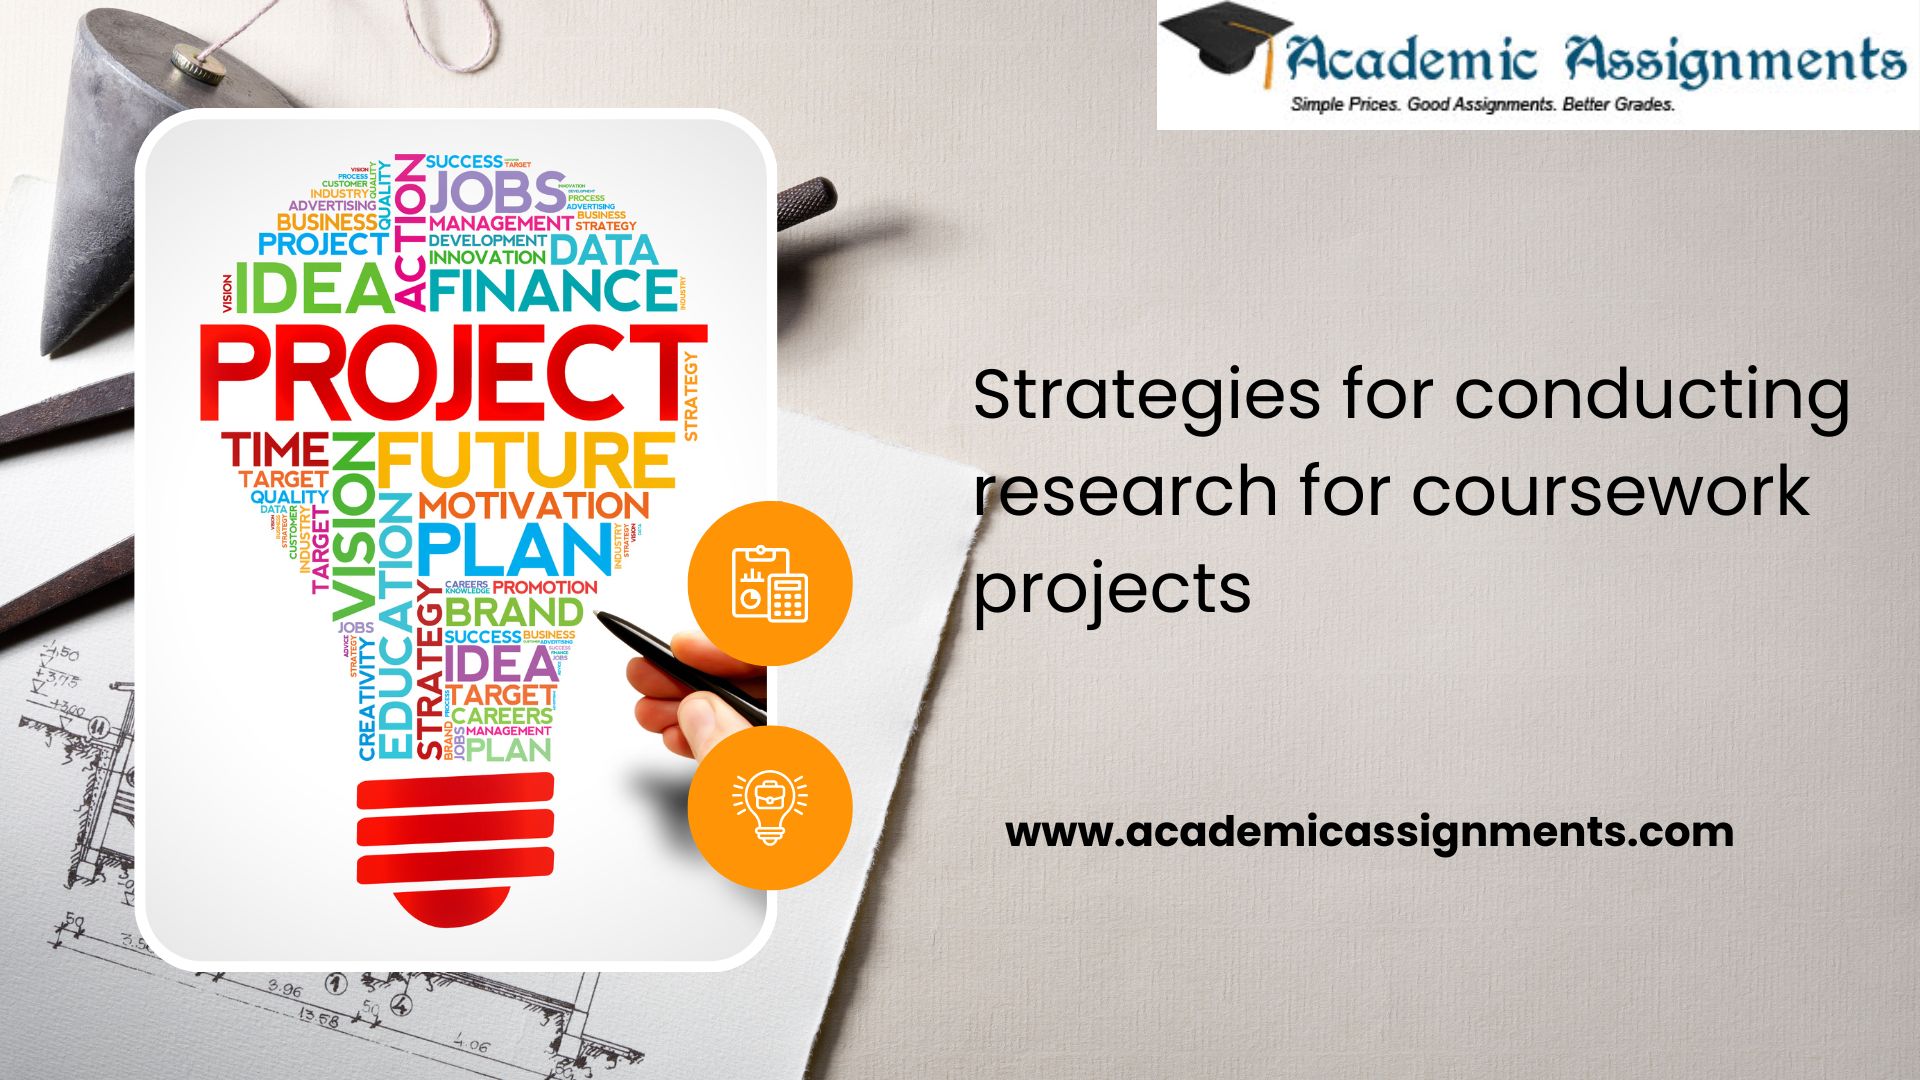 Strategies for conducting research for coursework projects